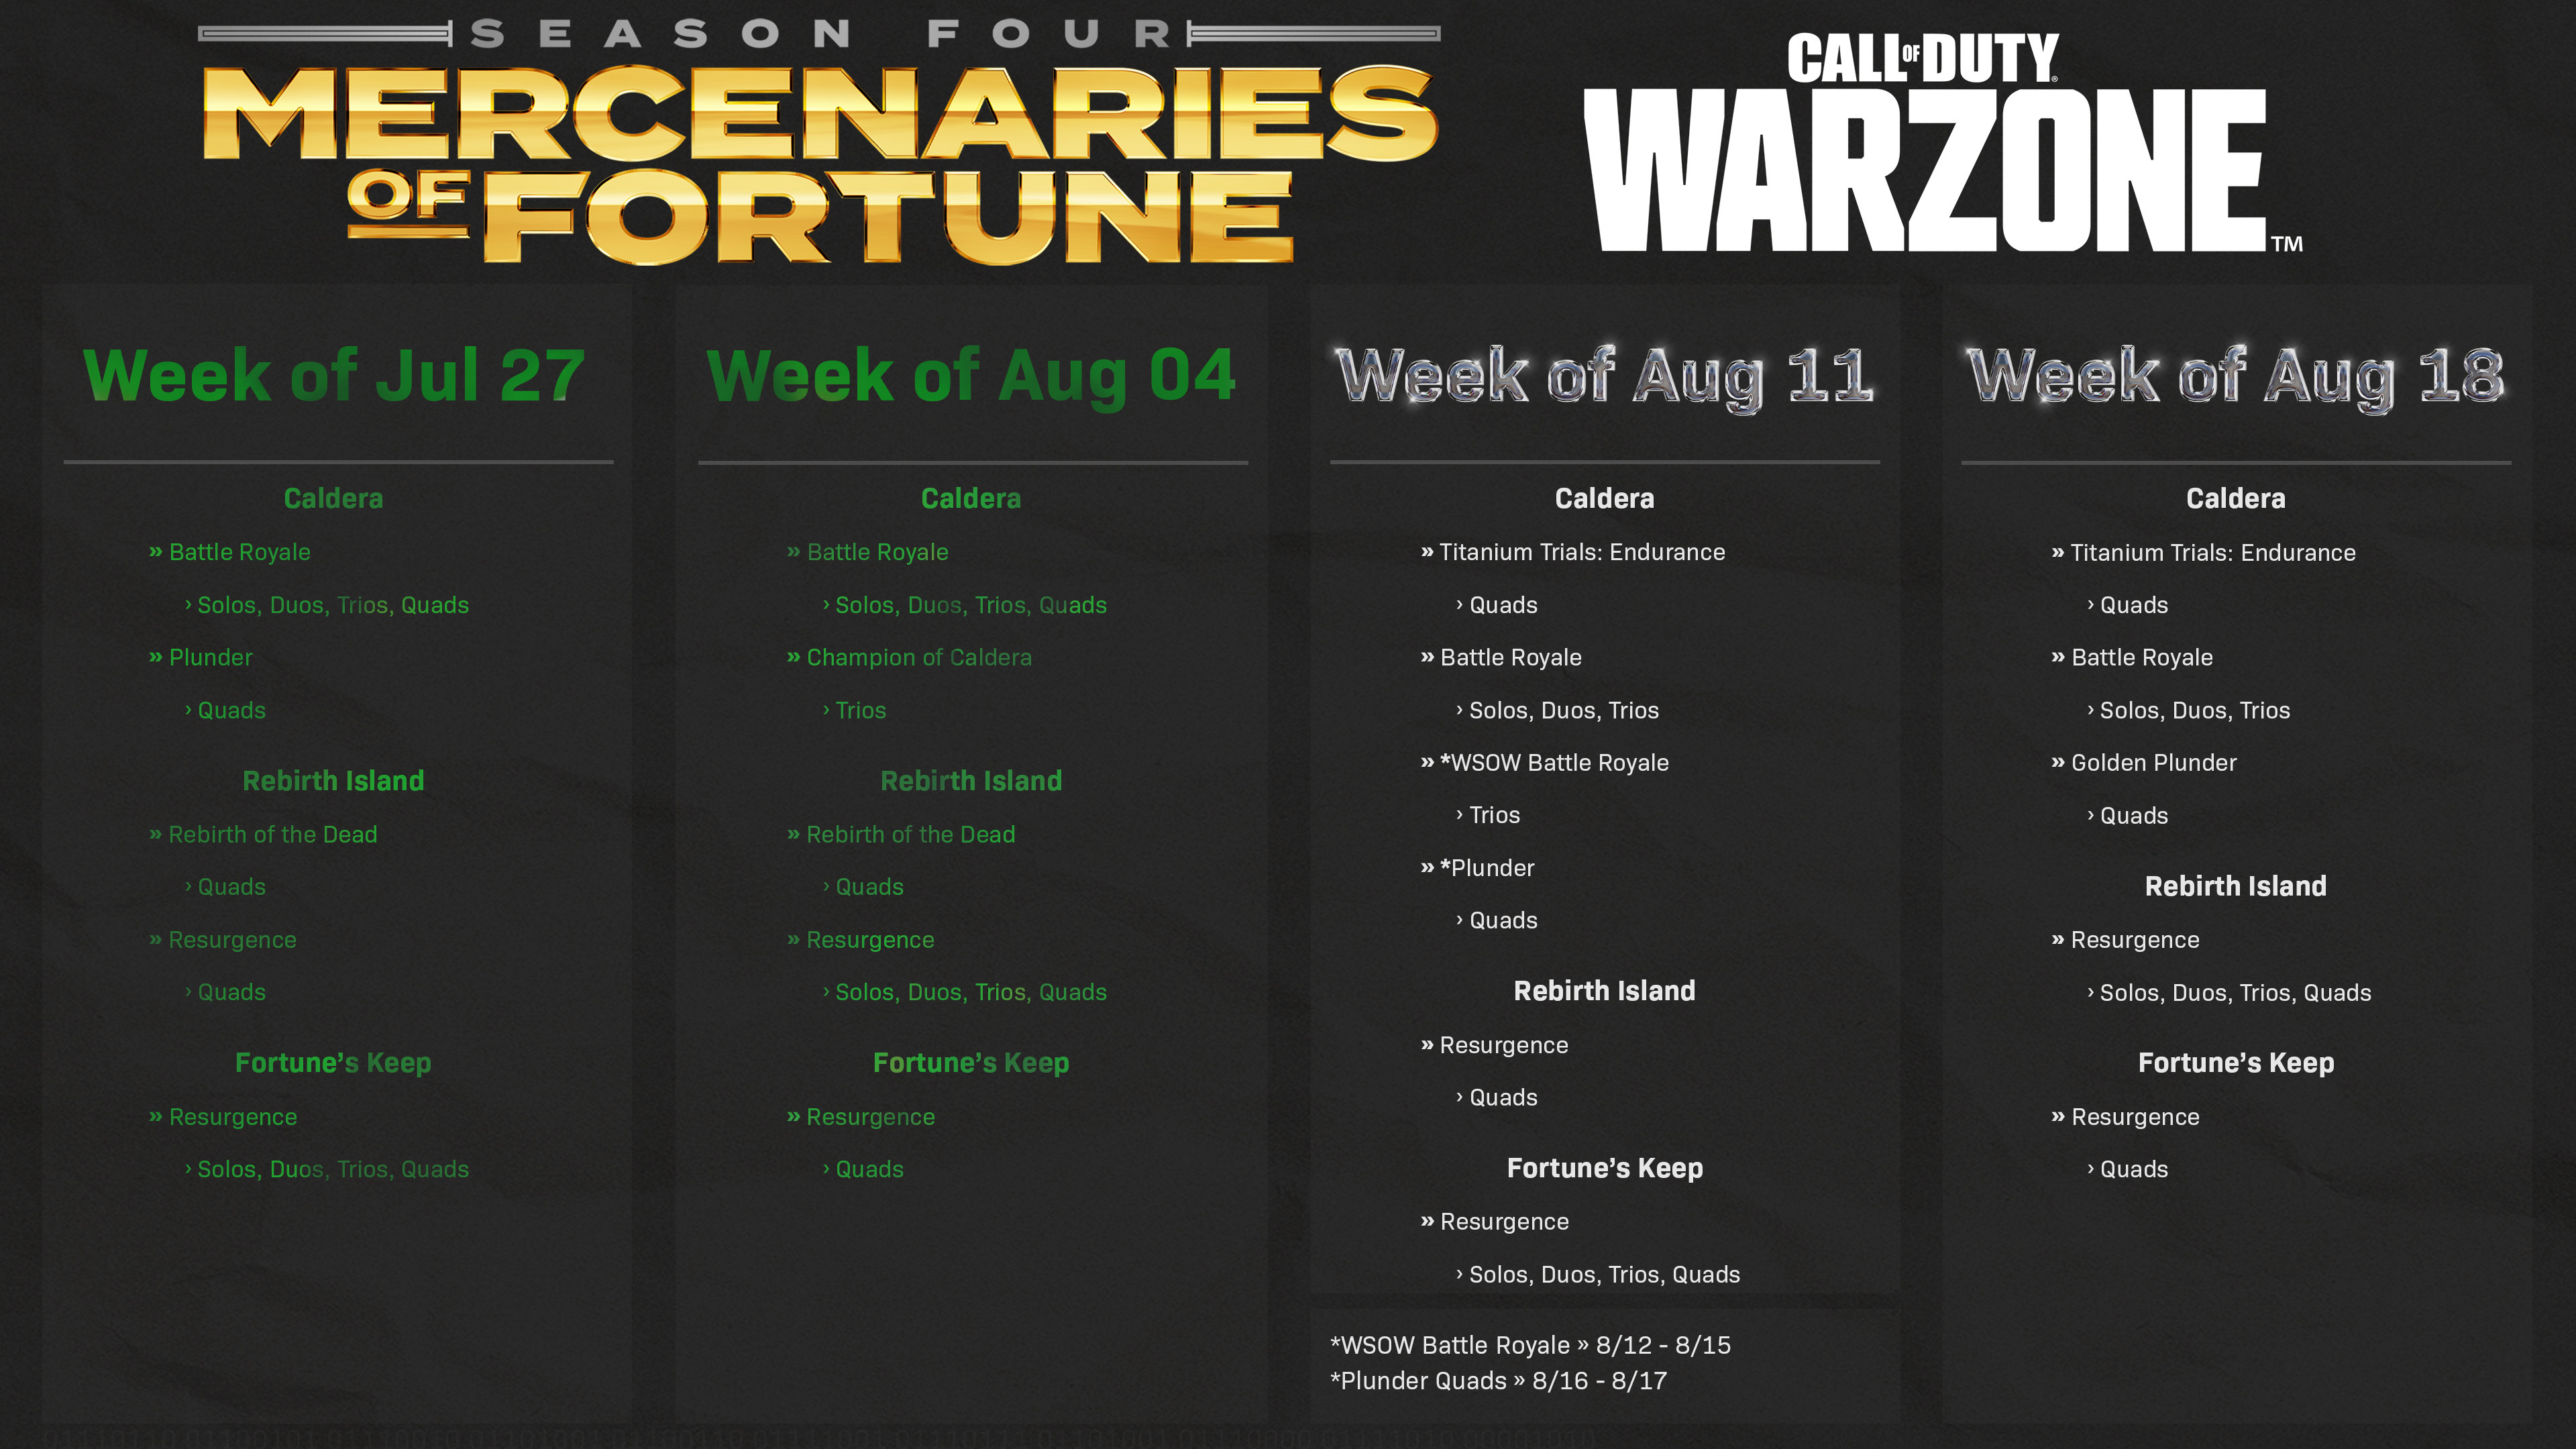 Image of the new Playlist forecast for Warzone